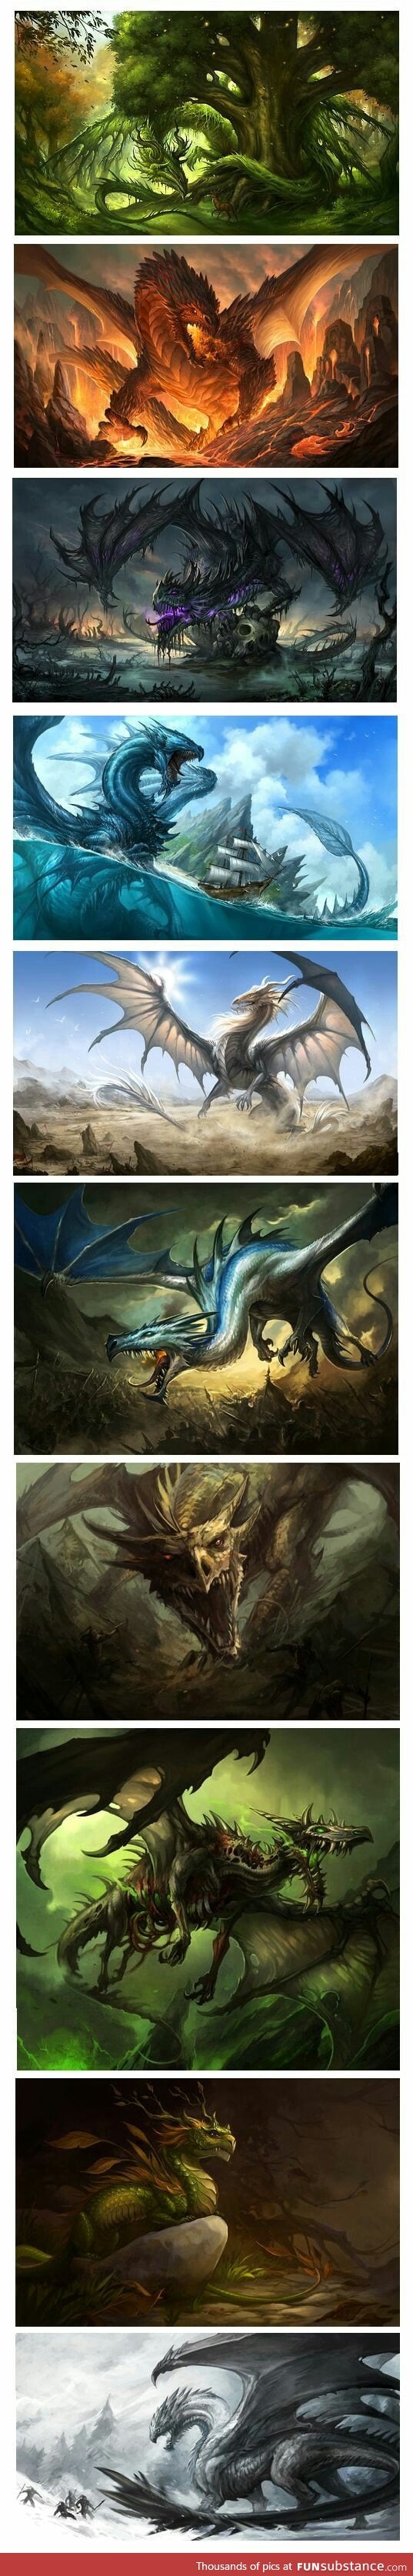 Some awesome dragons